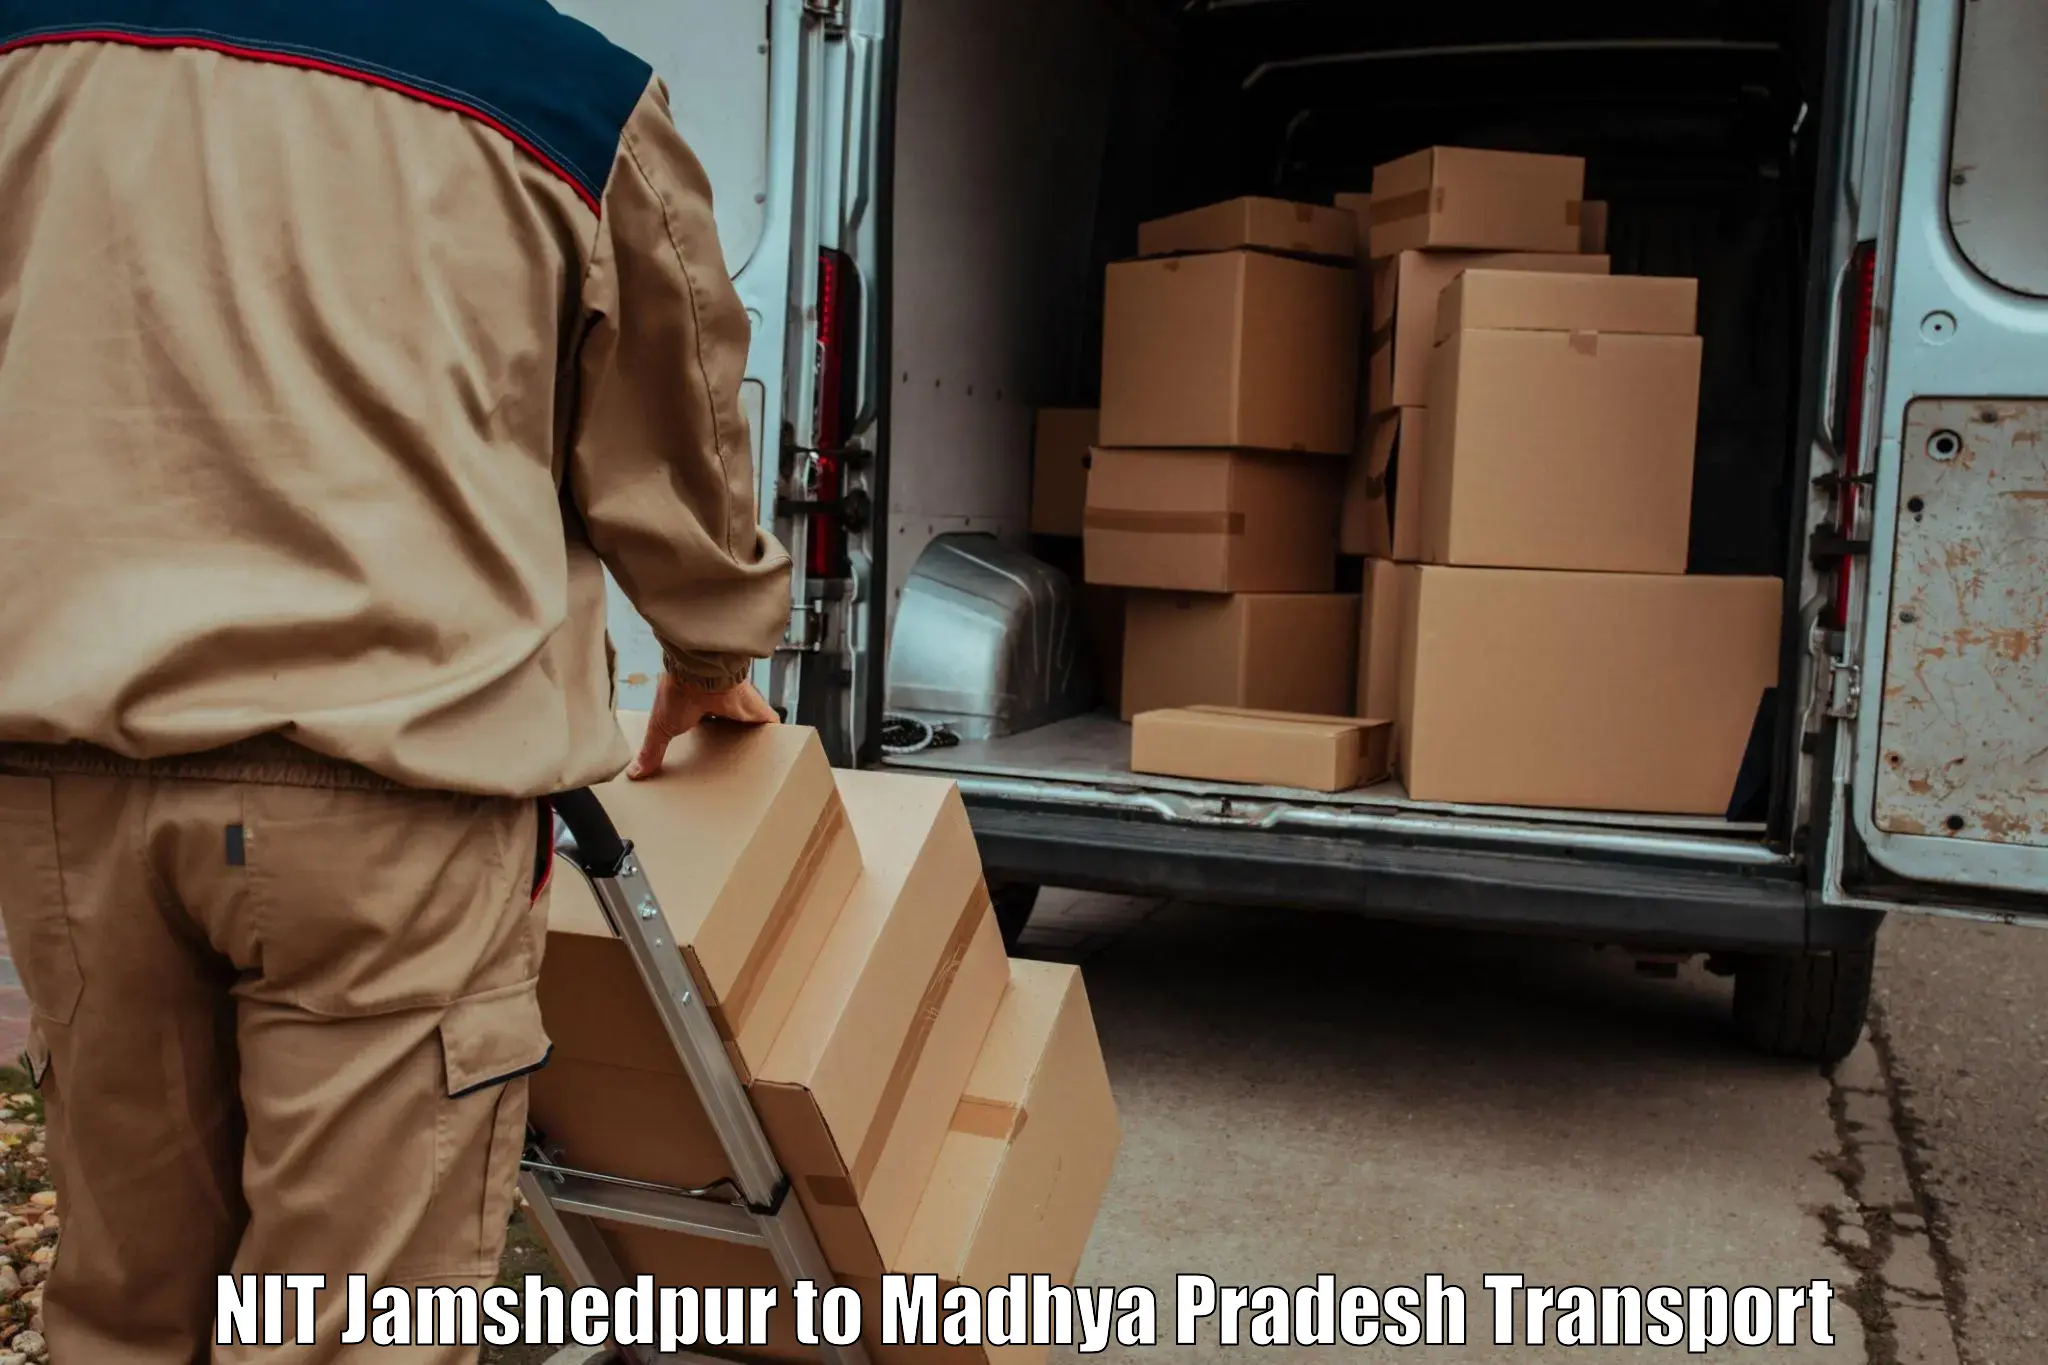 Air freight transport services NIT Jamshedpur to Sehore